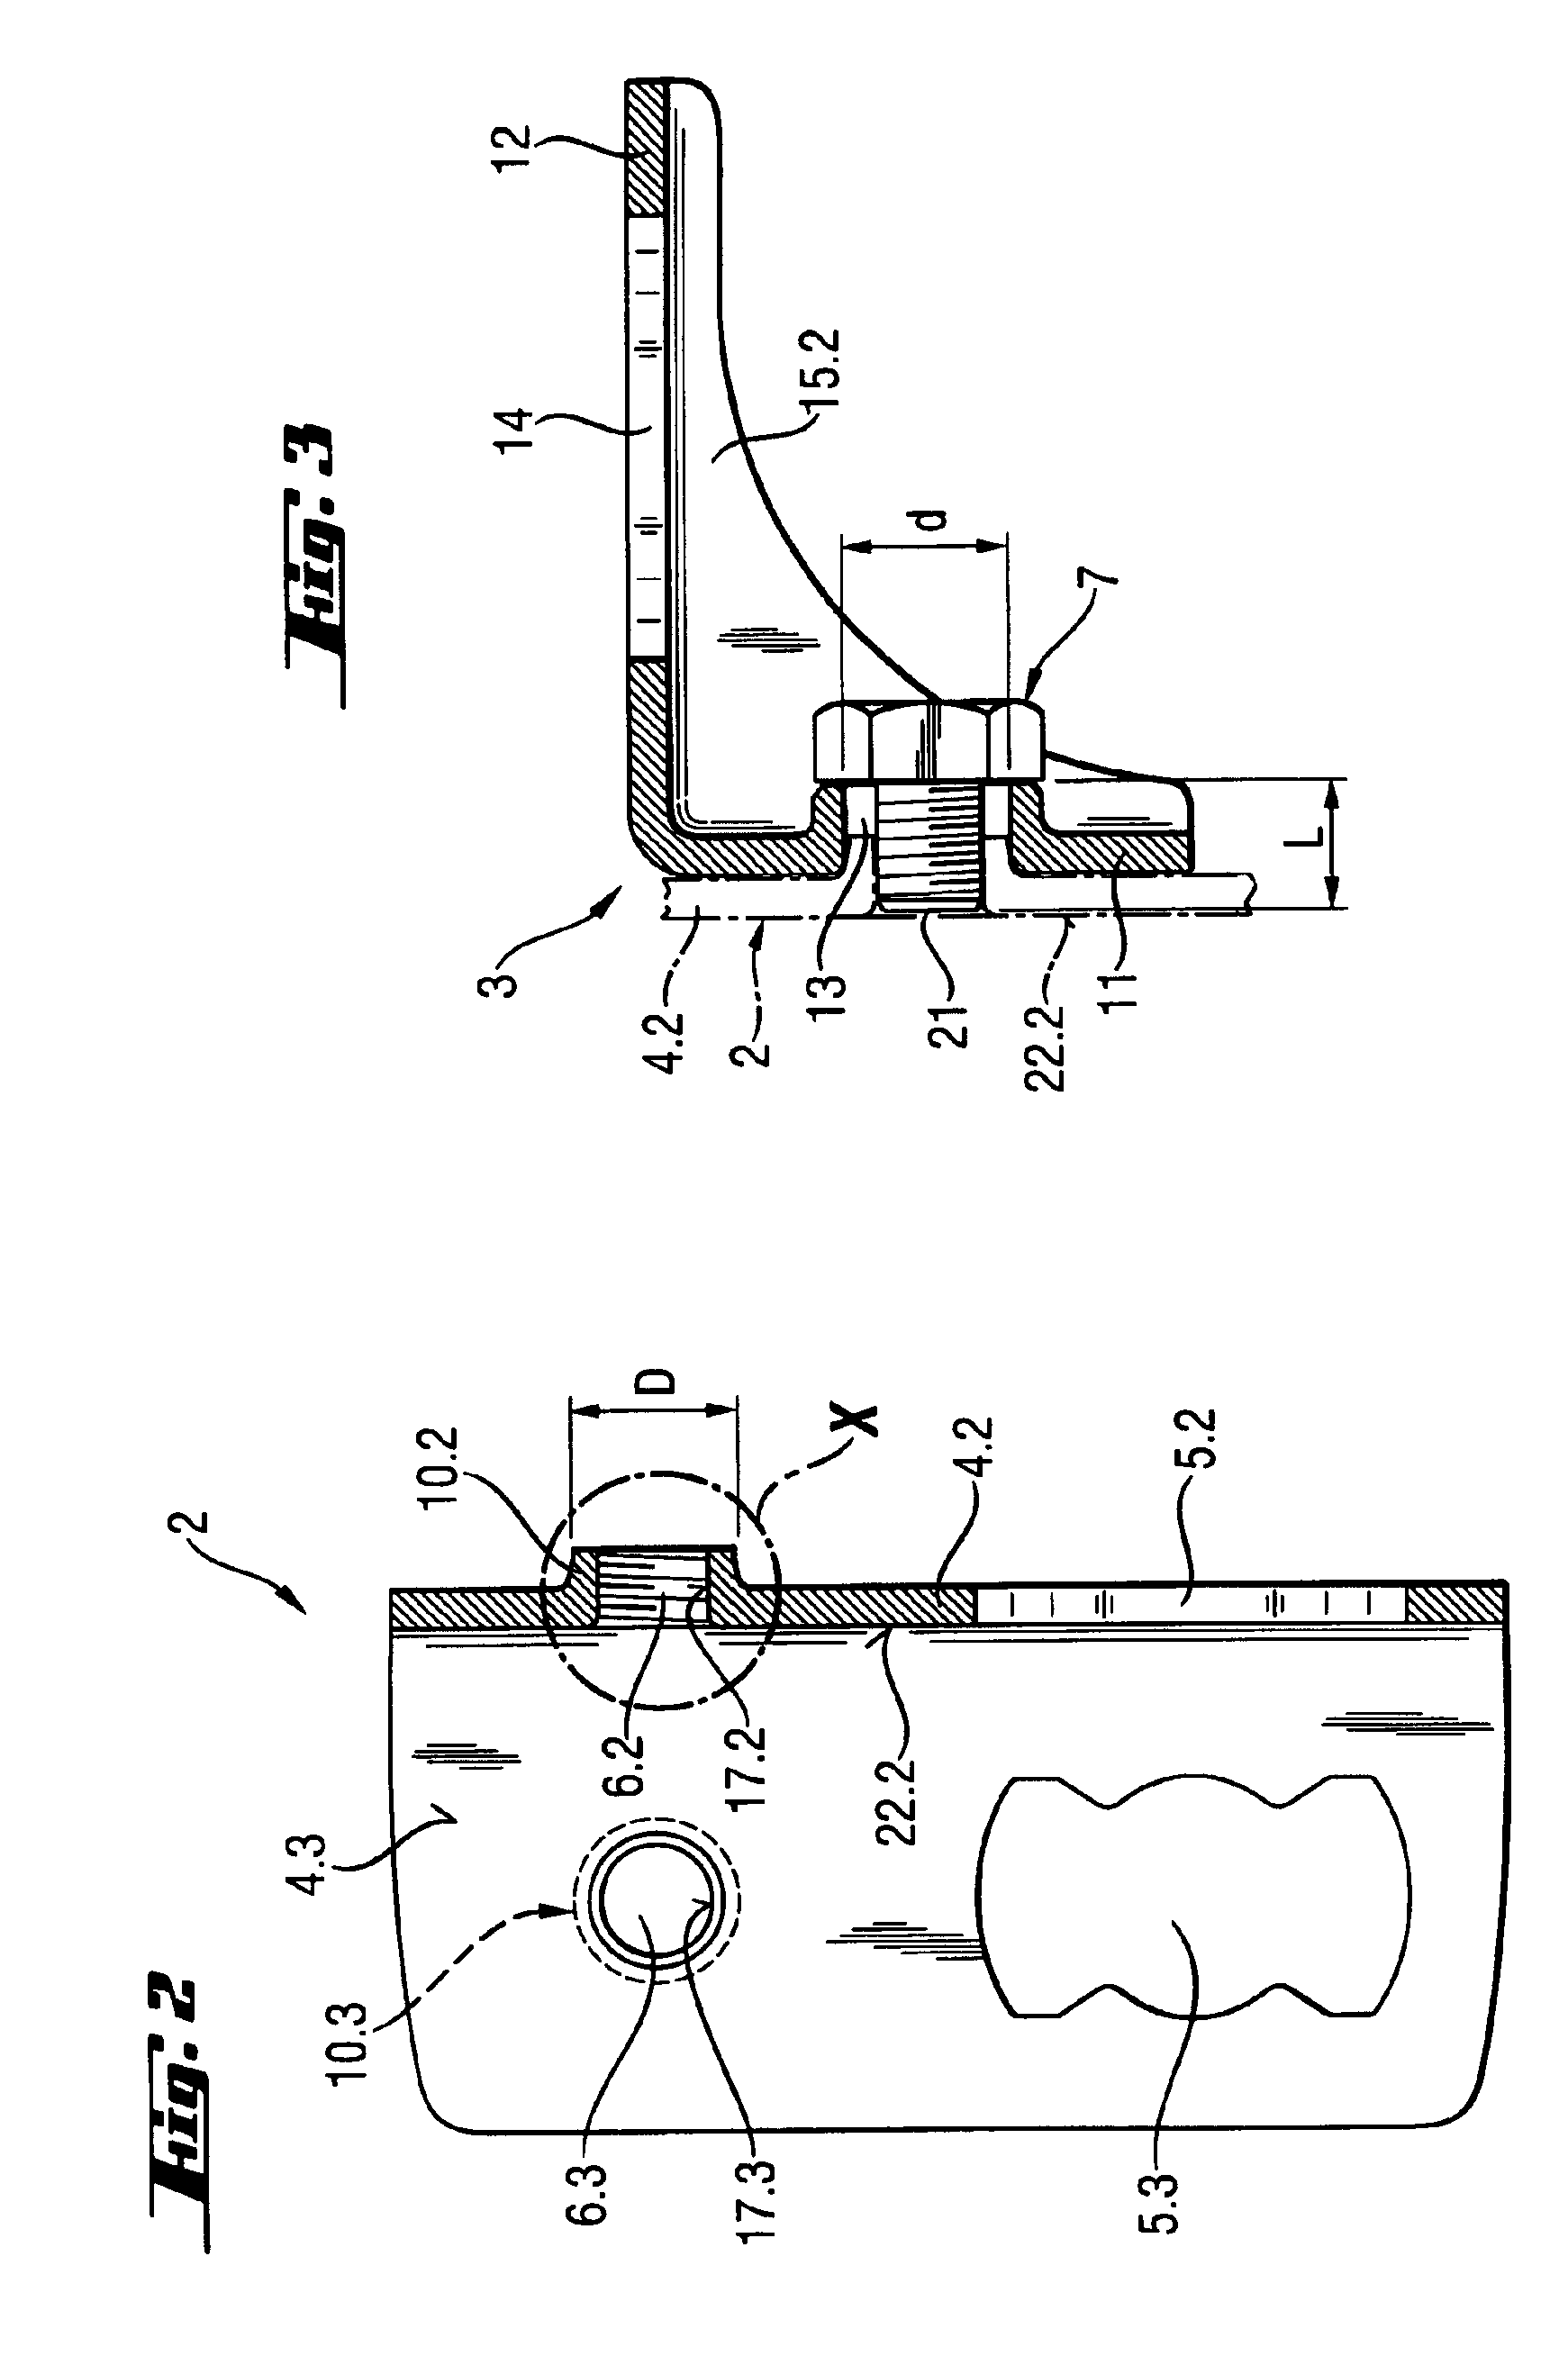 System for connecting mounting rails